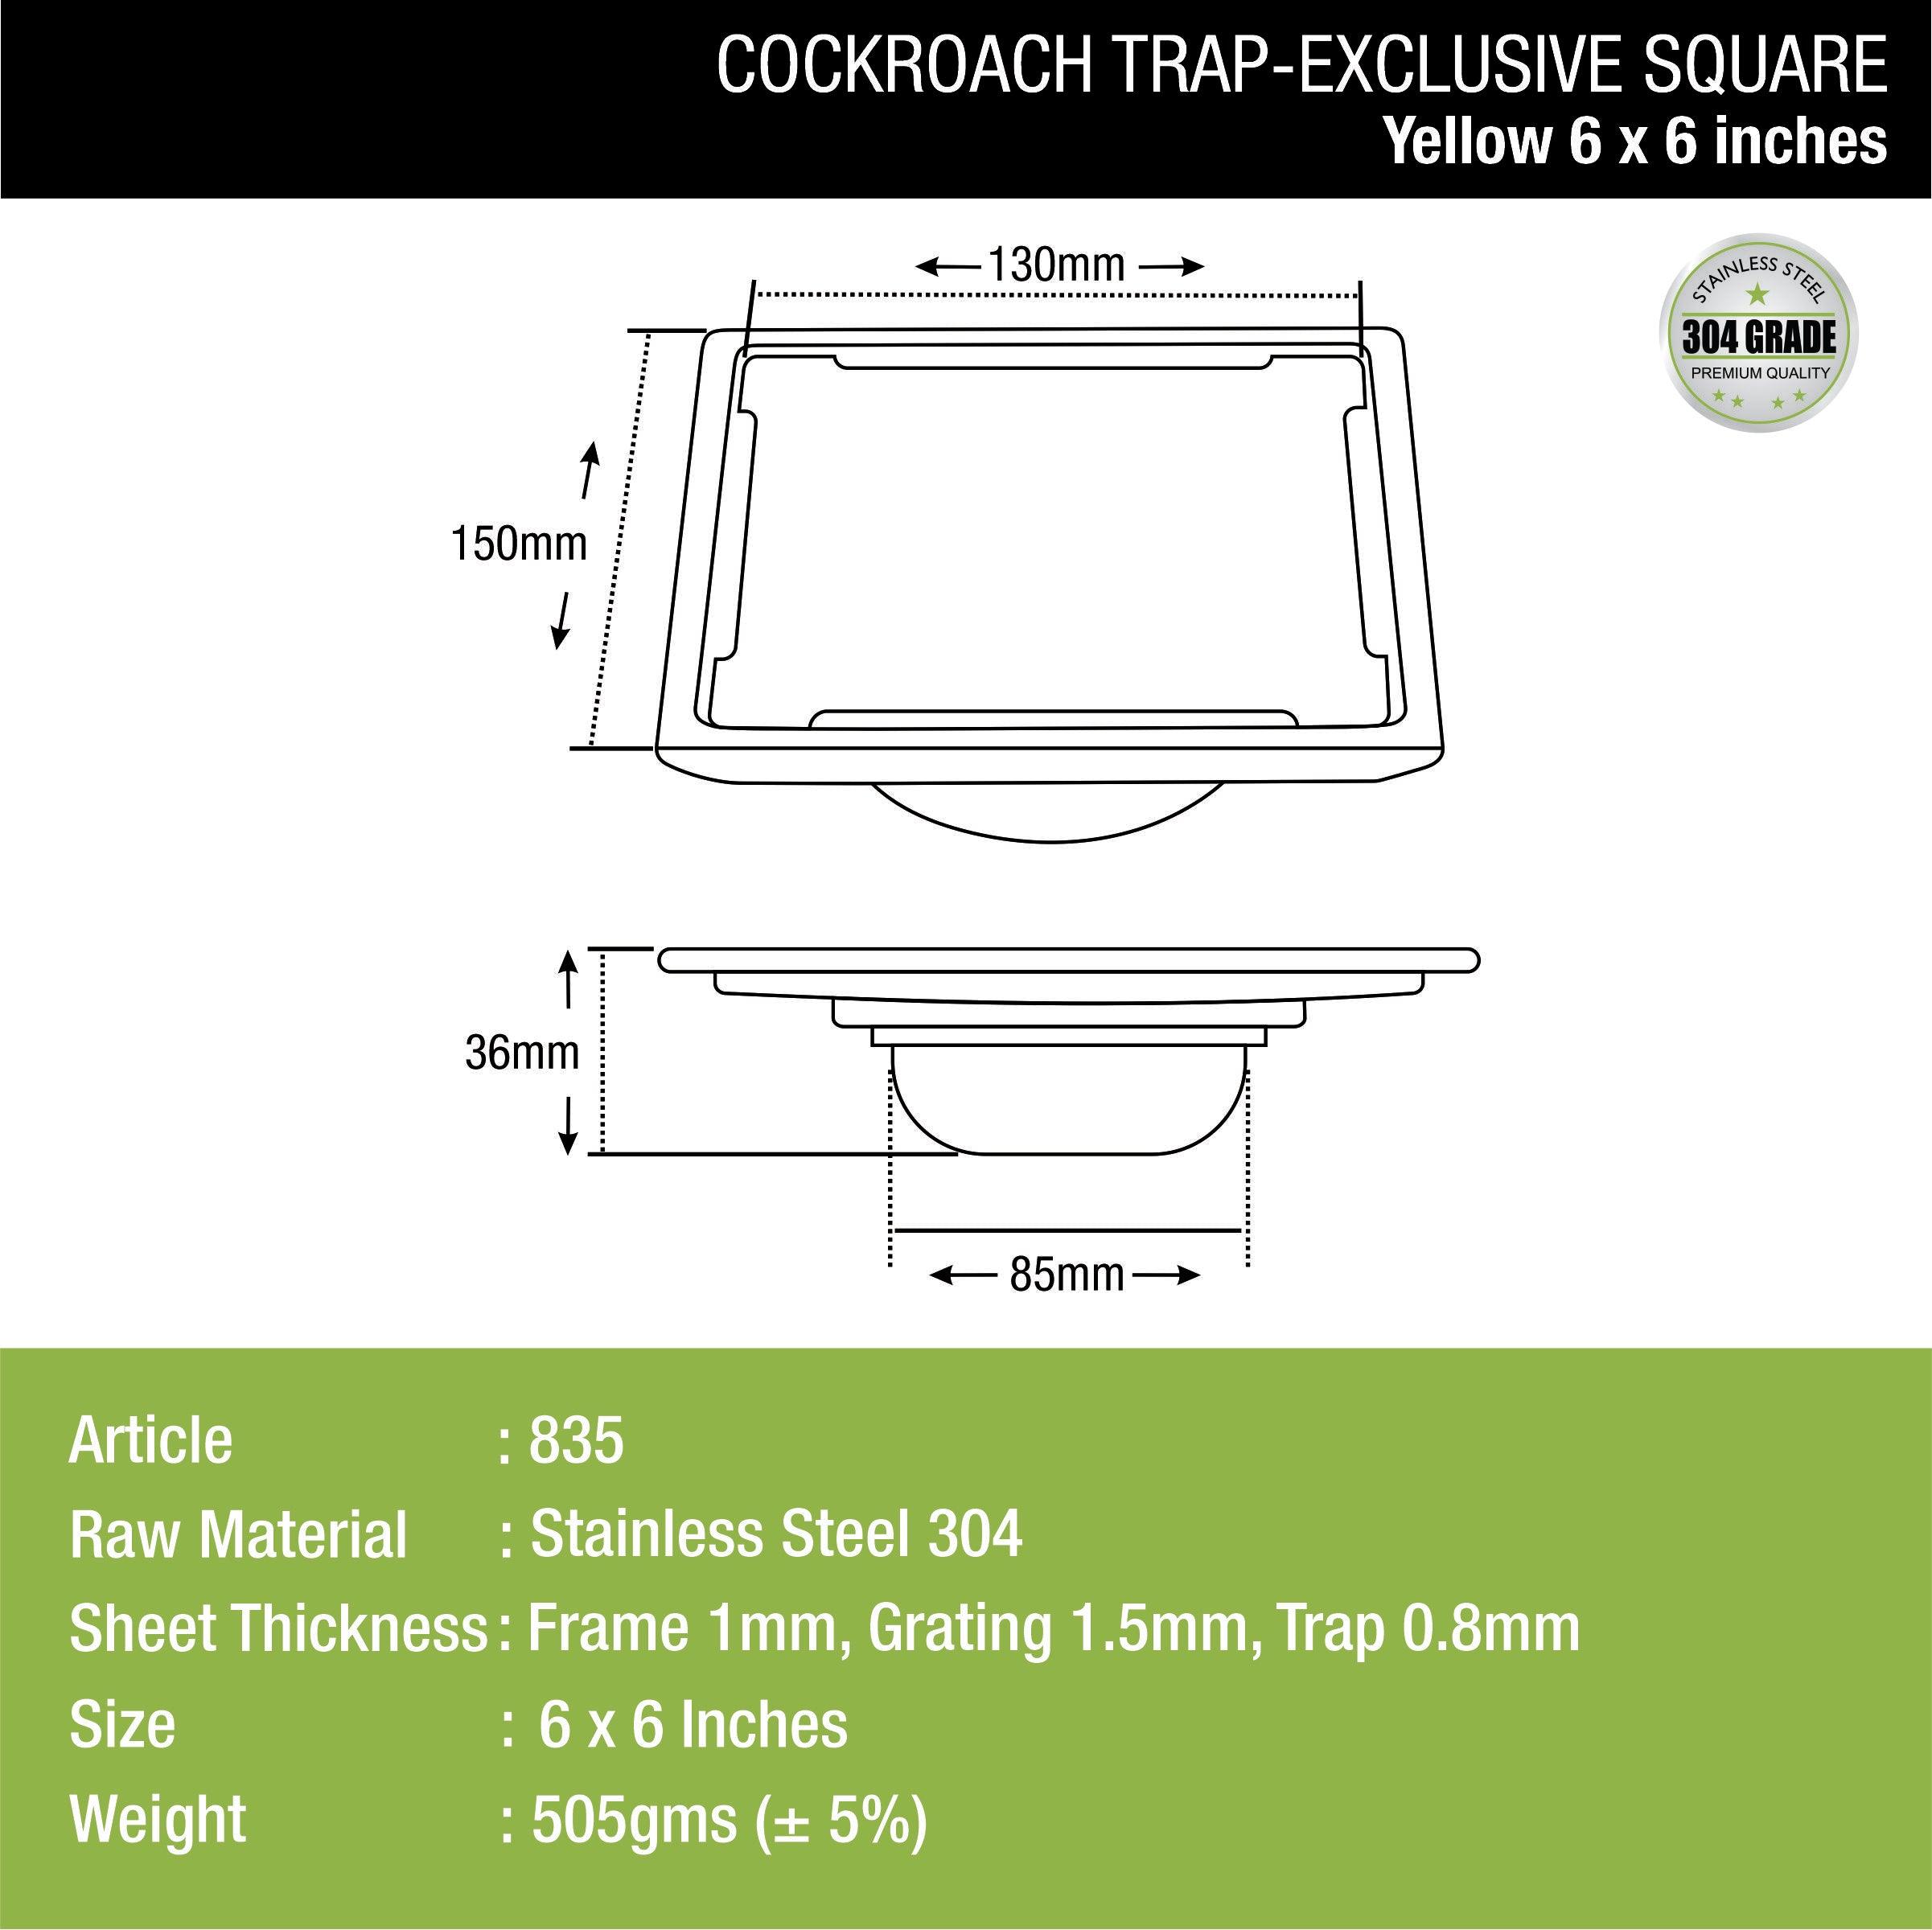 Yellow Exclusive Square Floor Drain (6 x 6 Inches) with Cockroach Trap dimensions and sizes